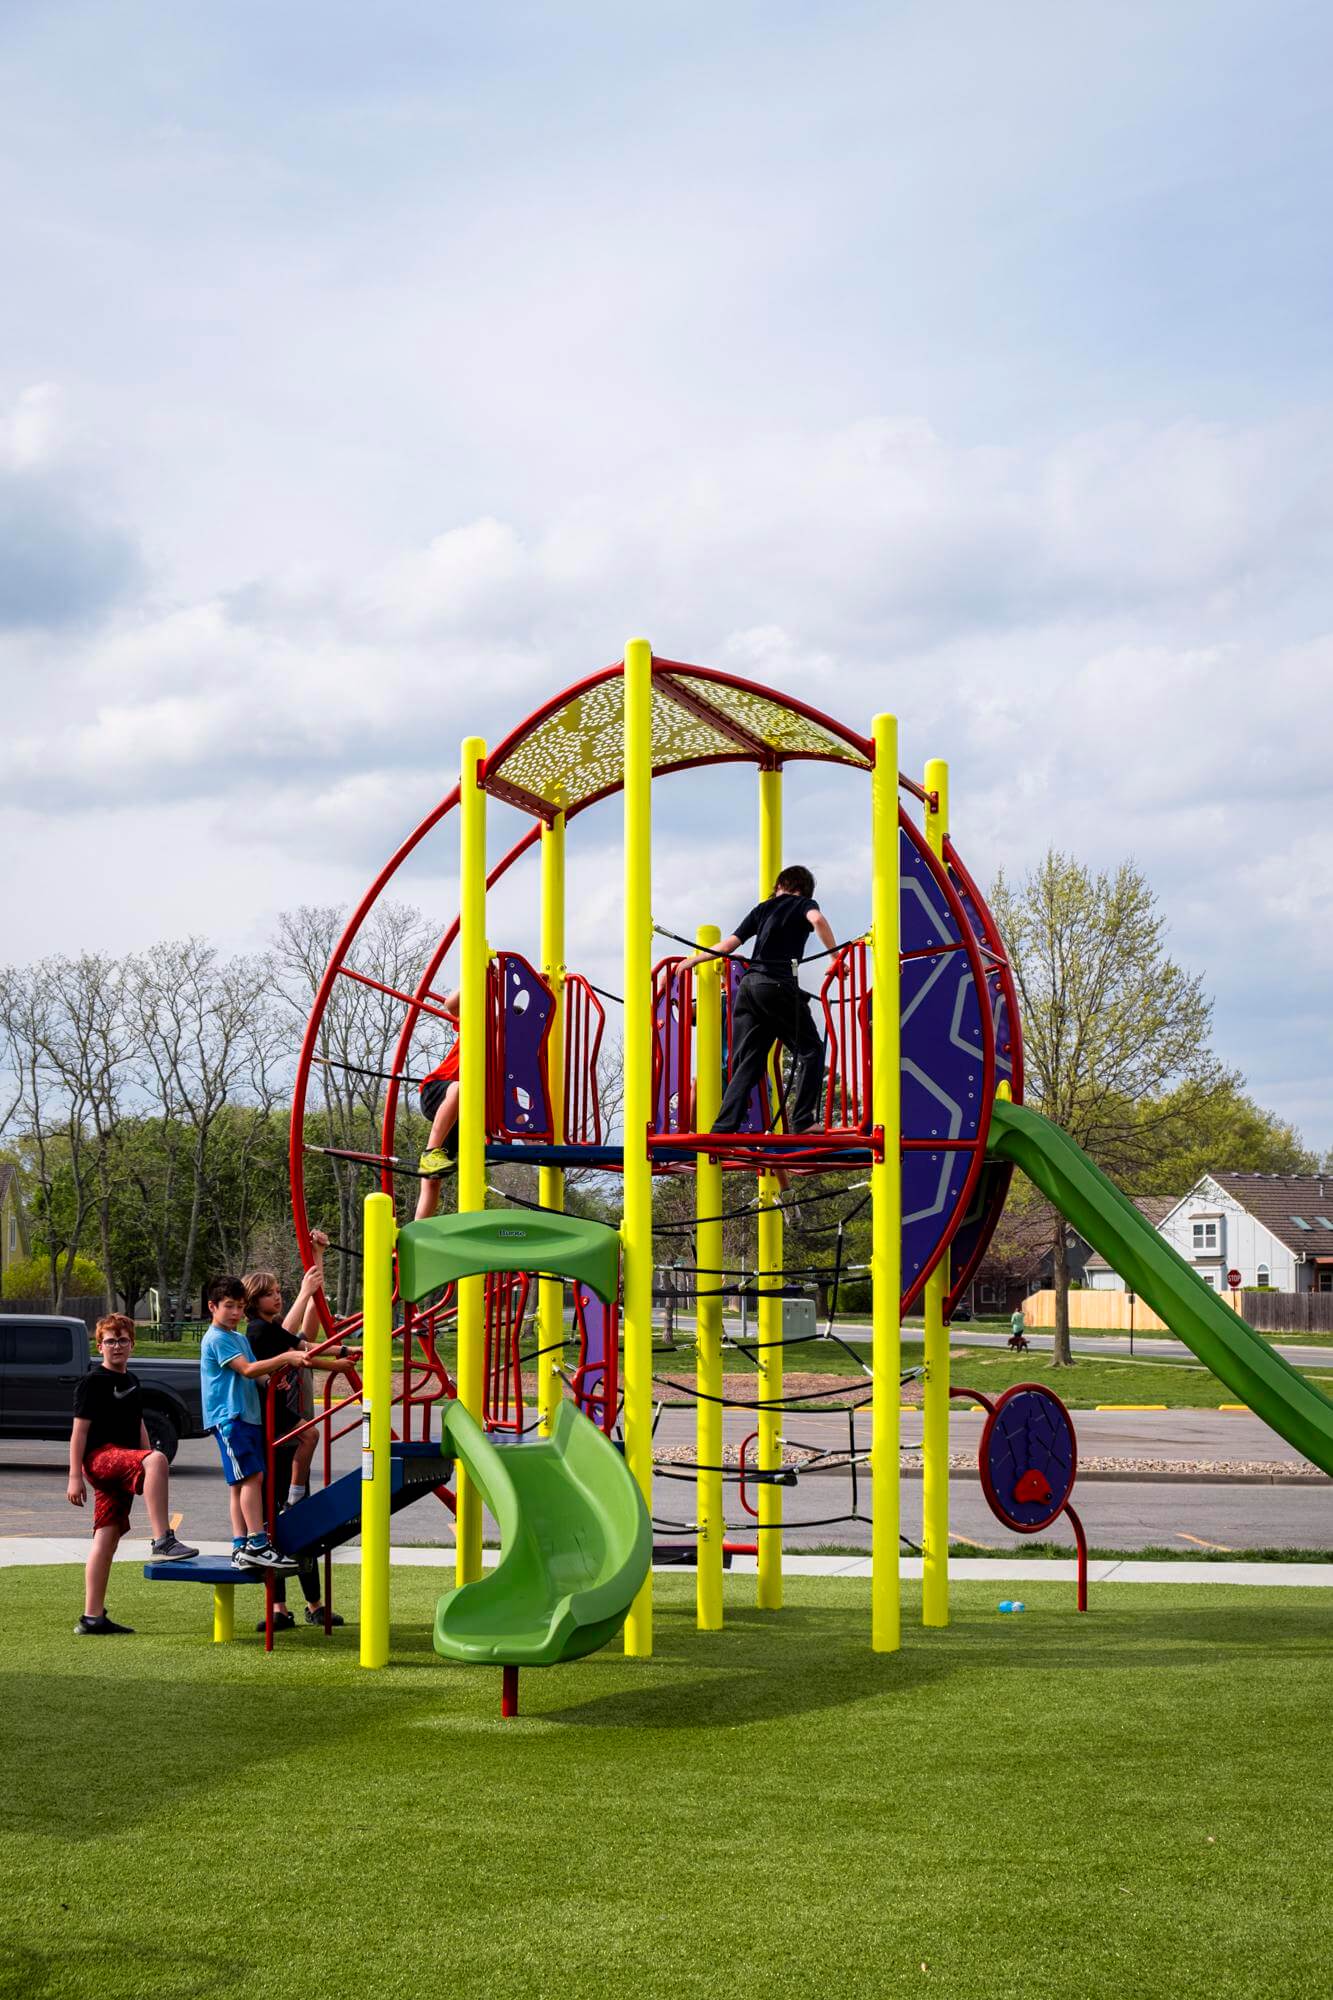 Children playing on a playground with a climbing tower and slide on a lush green artificial turf.